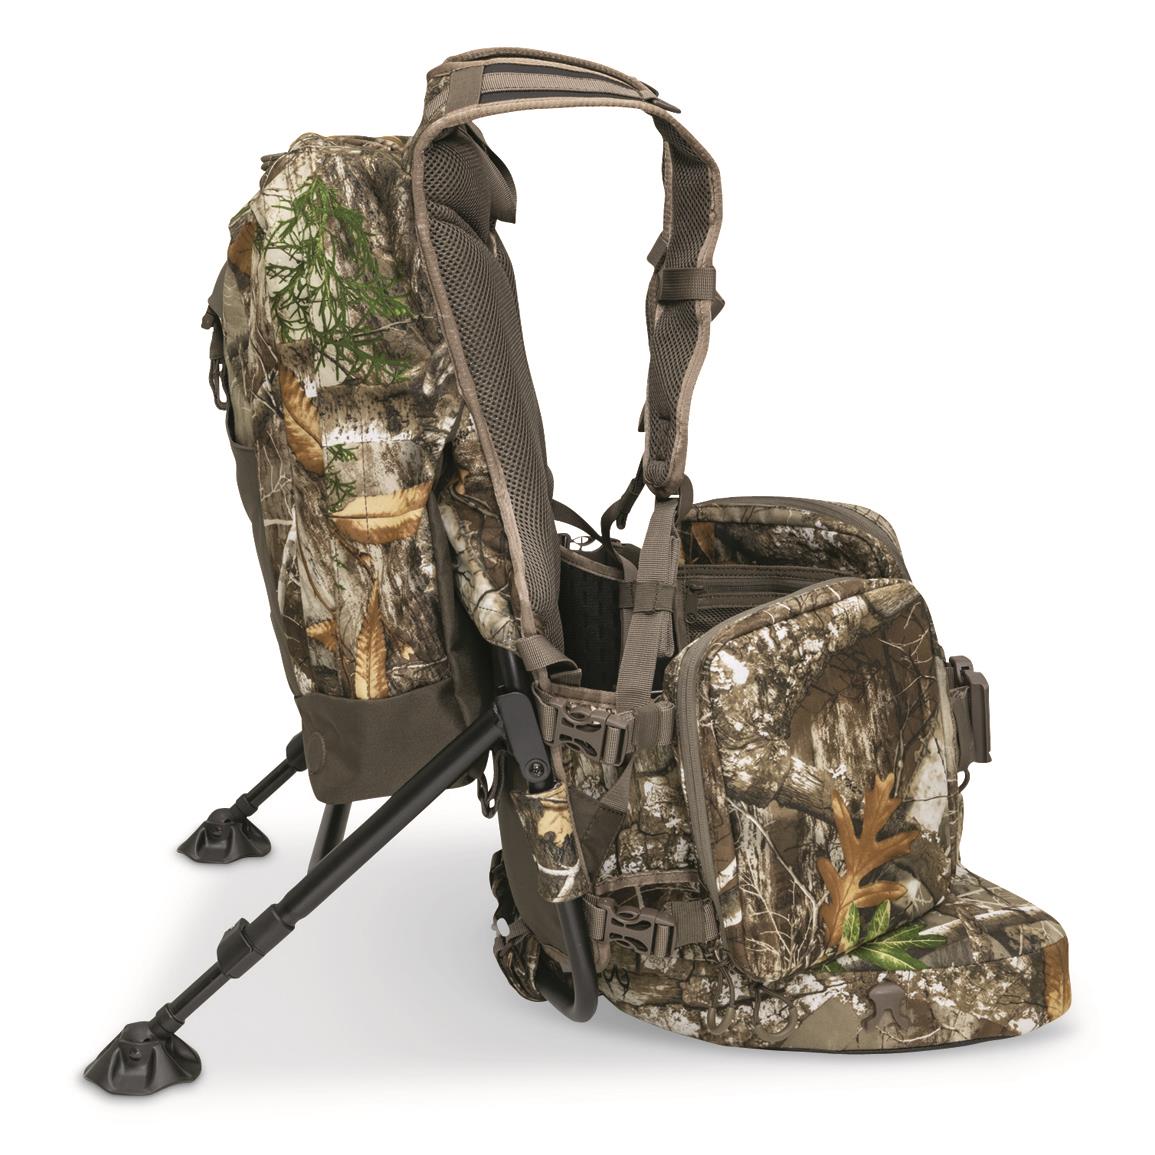 Sit-anywhere, removable kickstand frame, Realtree EDGE™